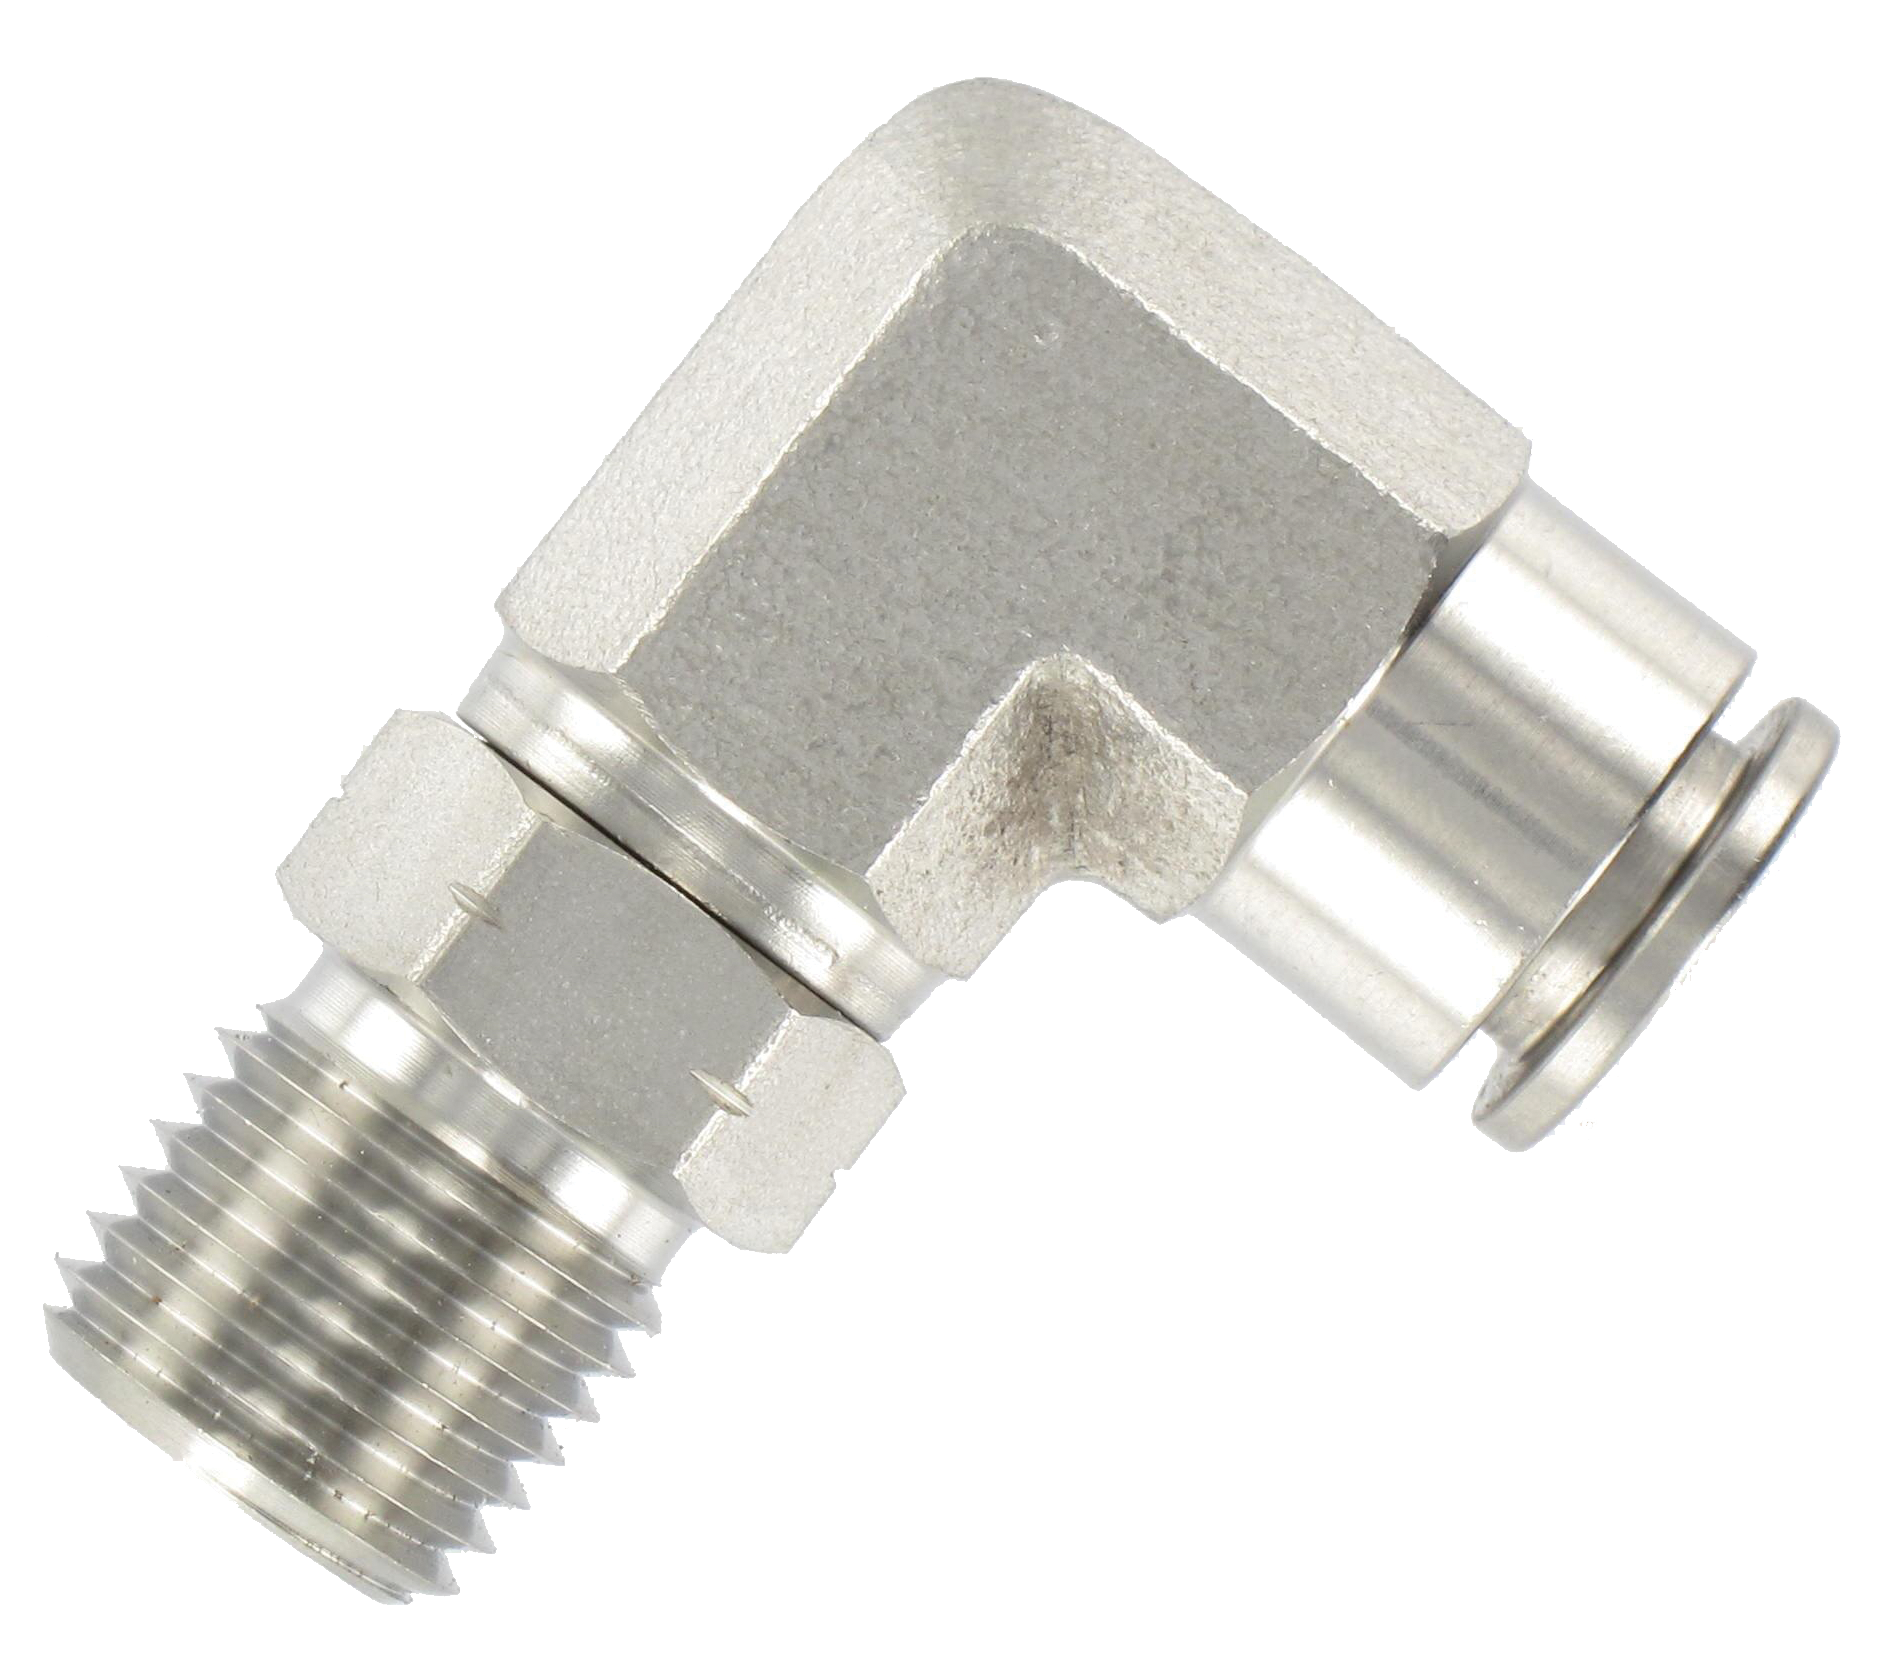 T8 - 1/4\" NPT male swivel stainless steel 316 elbow push-in fittings Pneumatic function fittings